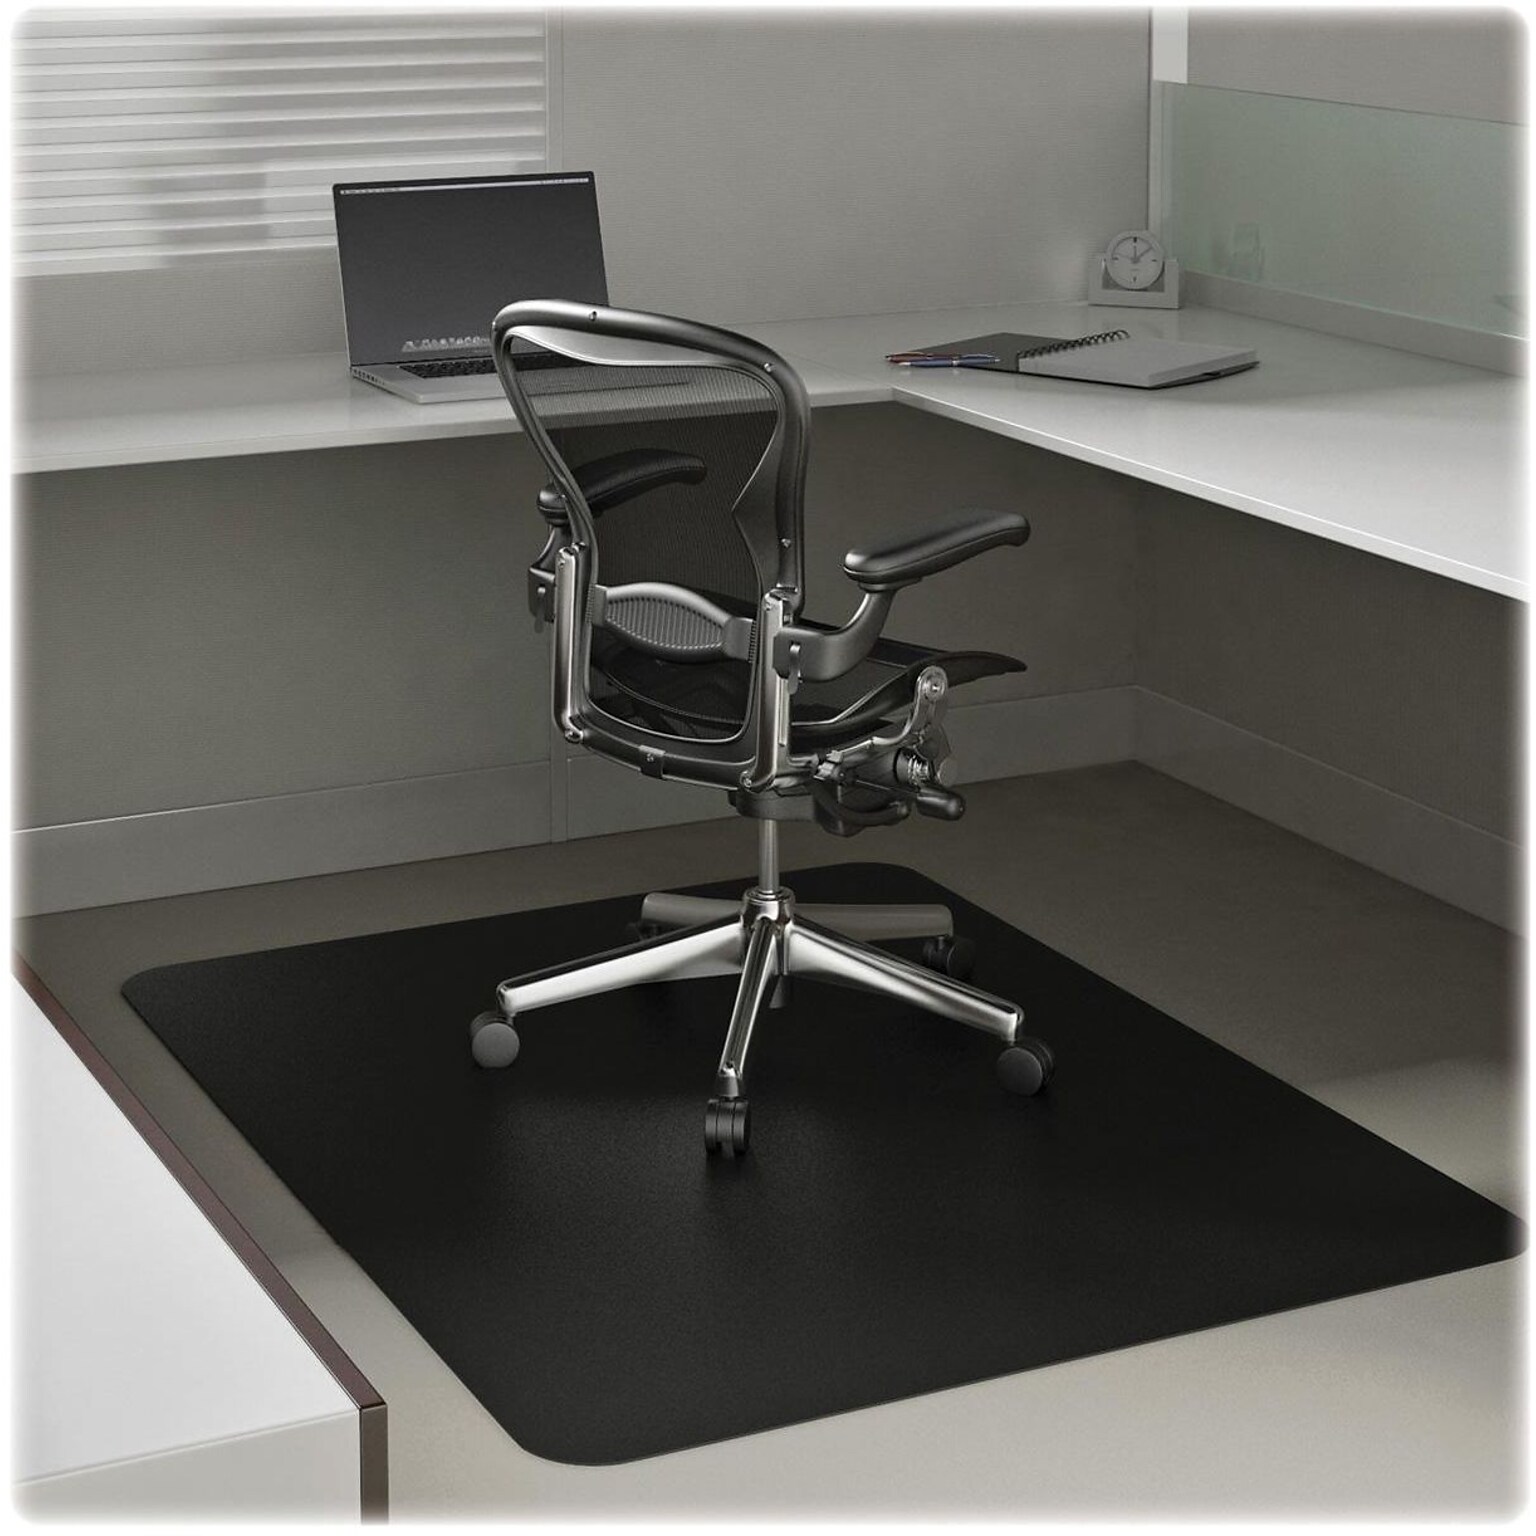 Deflect-O EconoMat 46 X 60 Occasional Use Chair Mat for Commercial Low Pile Carpeting, Black (CM11442FBLK)